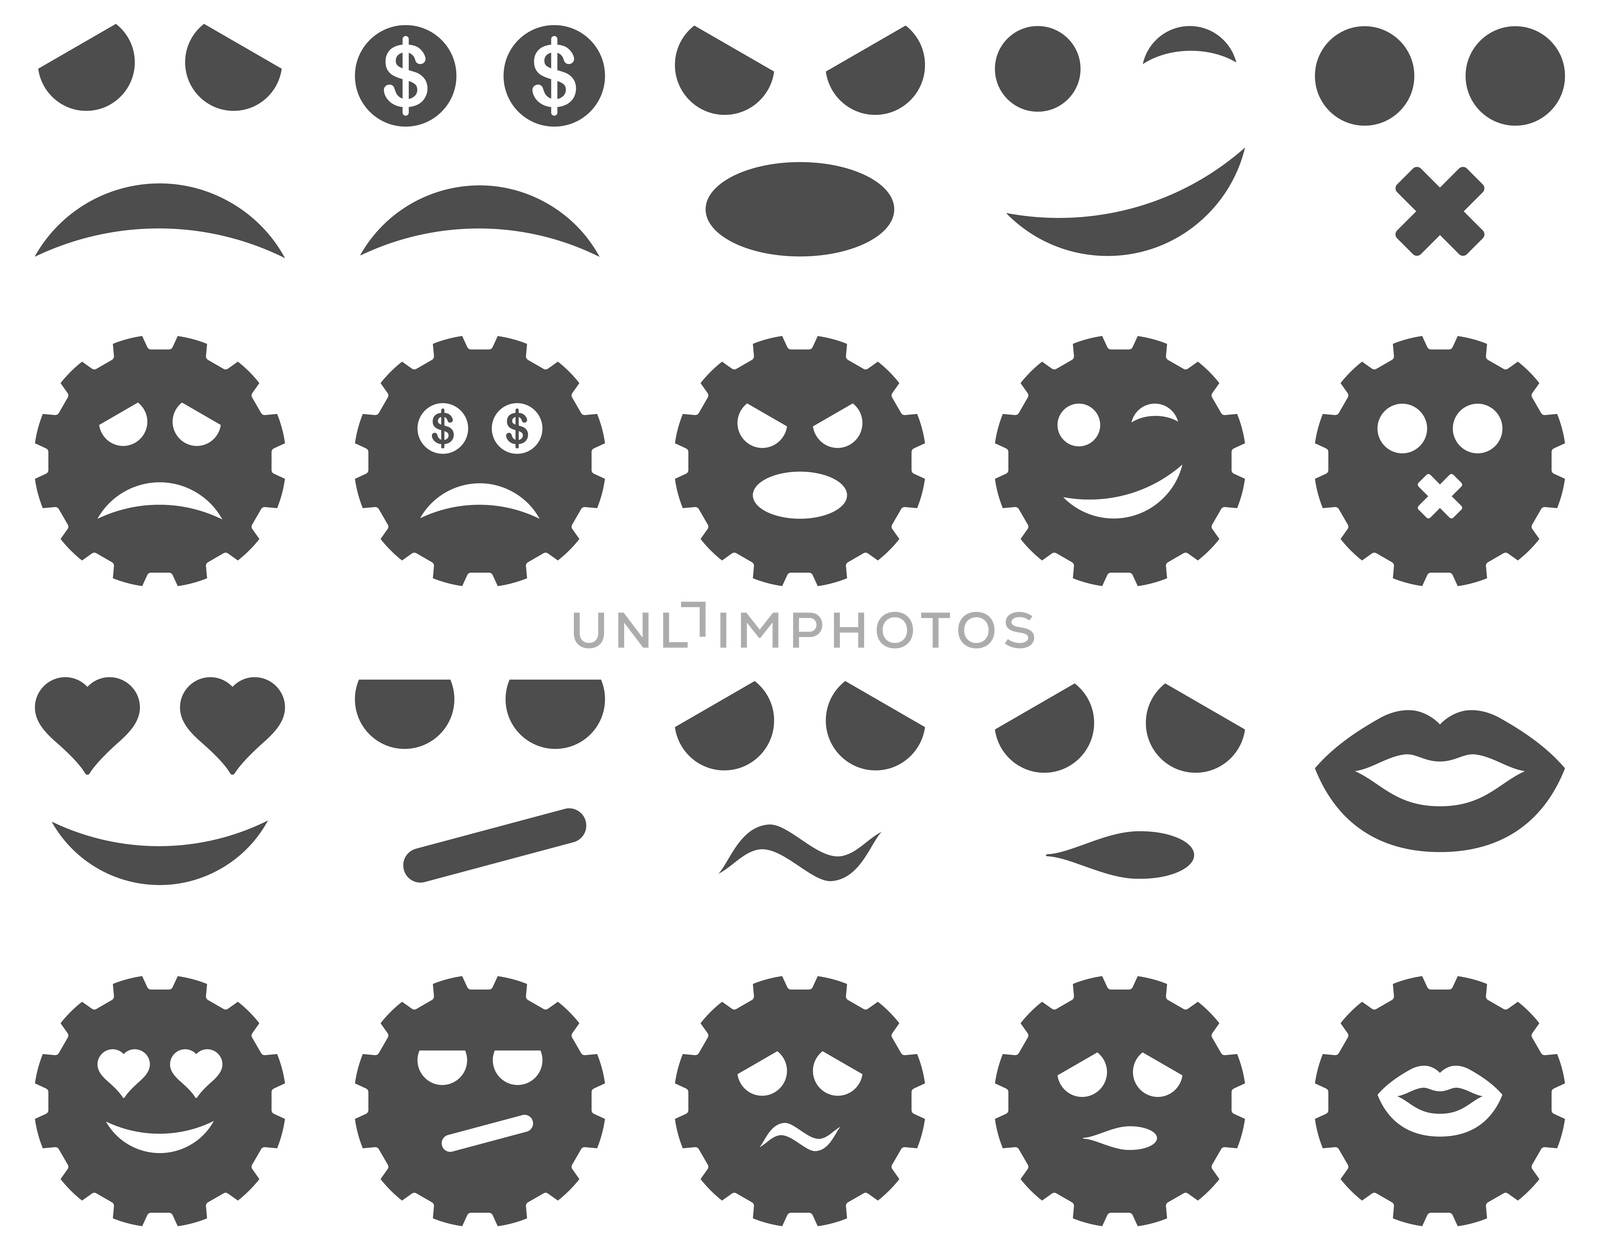 Tool, gear, smile, emotion icons. Glyph set style is flat images, gray symbols, isolated on a white background.